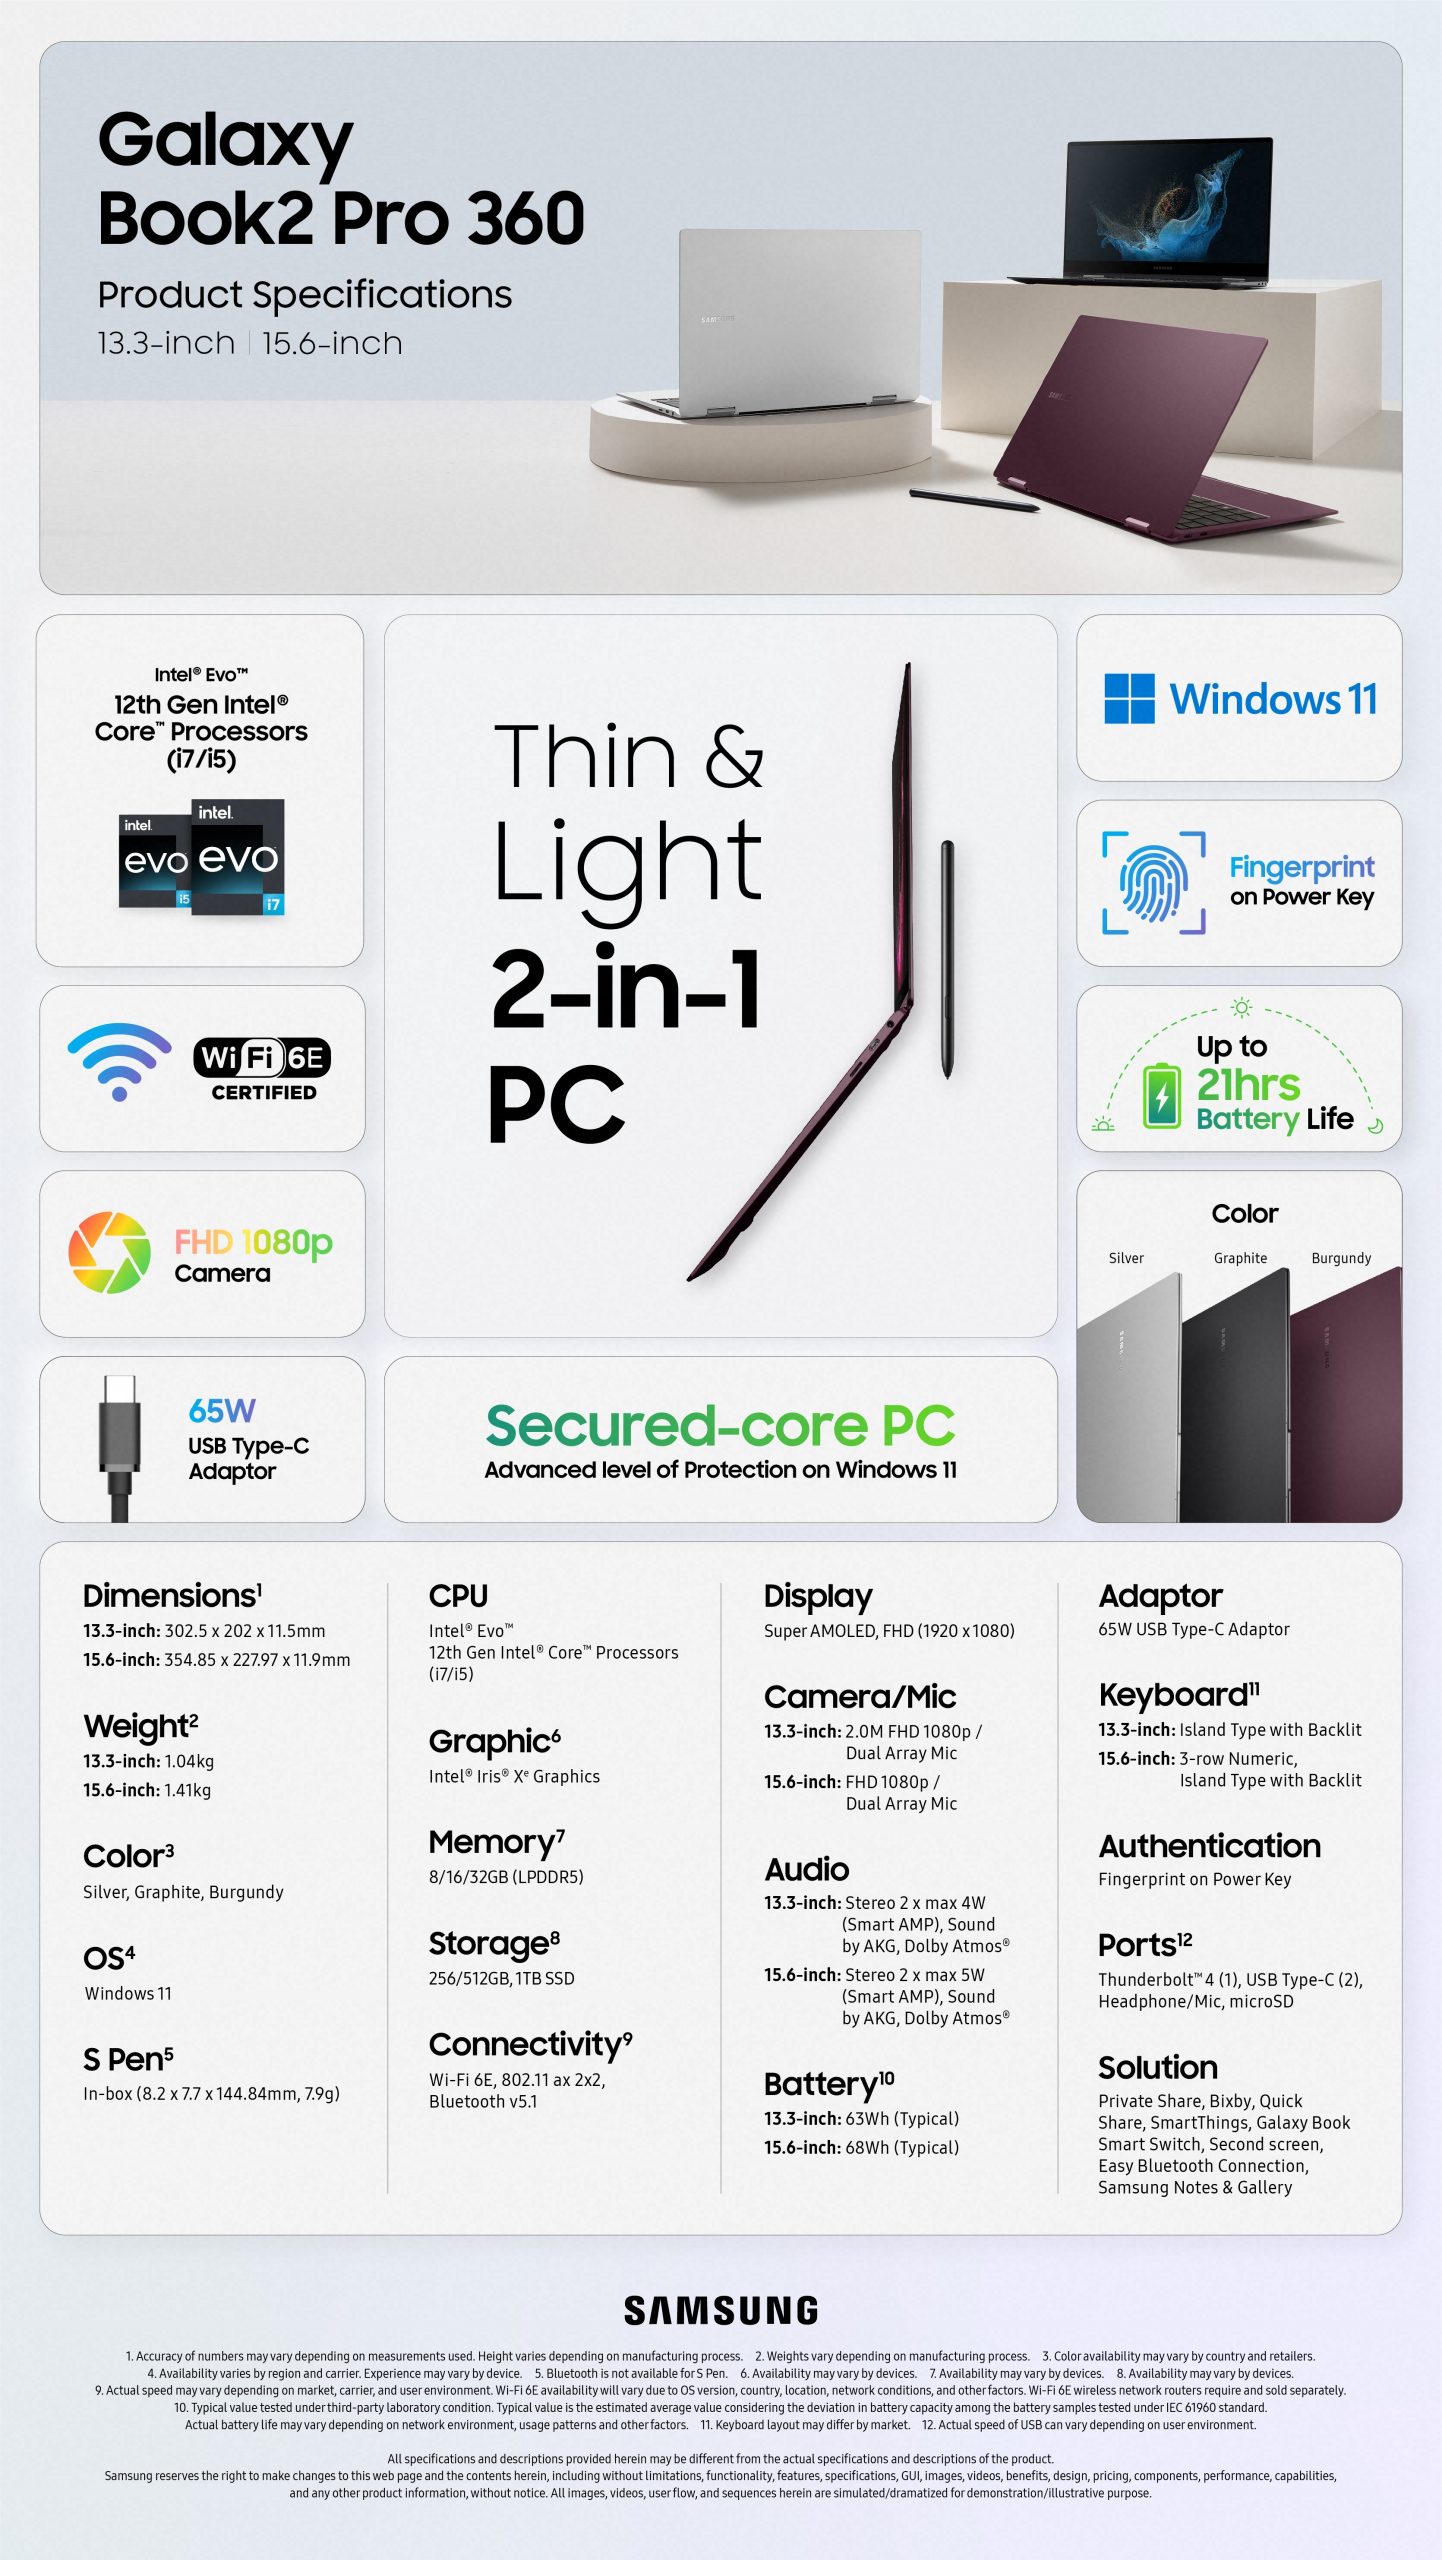 Samsung Galaxy Book 2 Pro 360 Specifications Infographic scaled